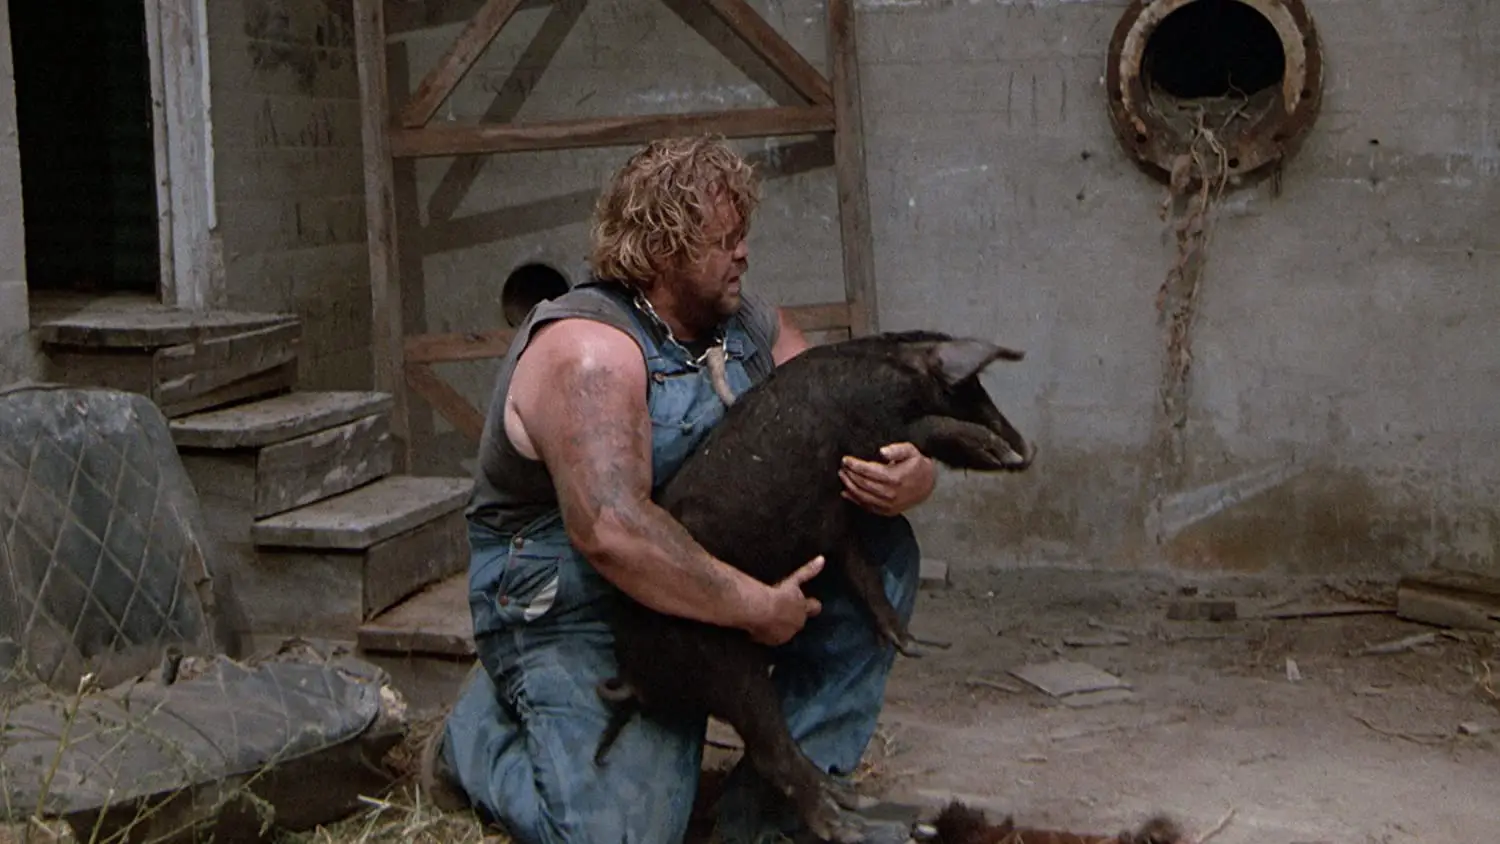 Buddy kneels on the ground, cradling a pig.